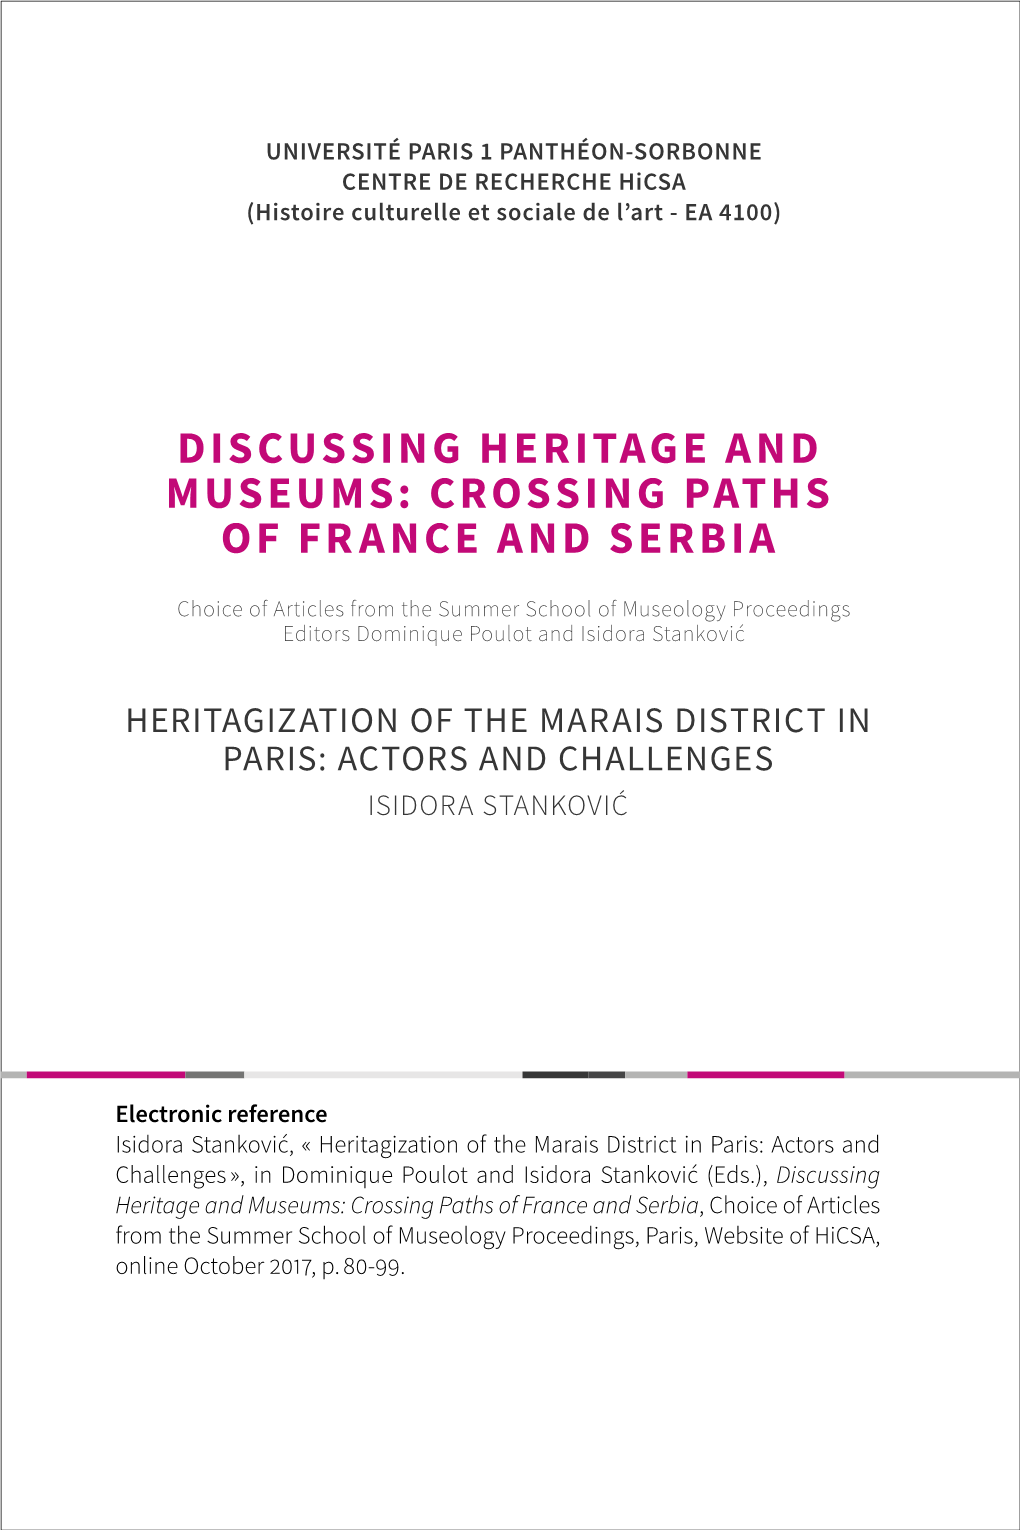 Heritagization of the Marais District in Paris: Actors and Challenges Isidora Stanković